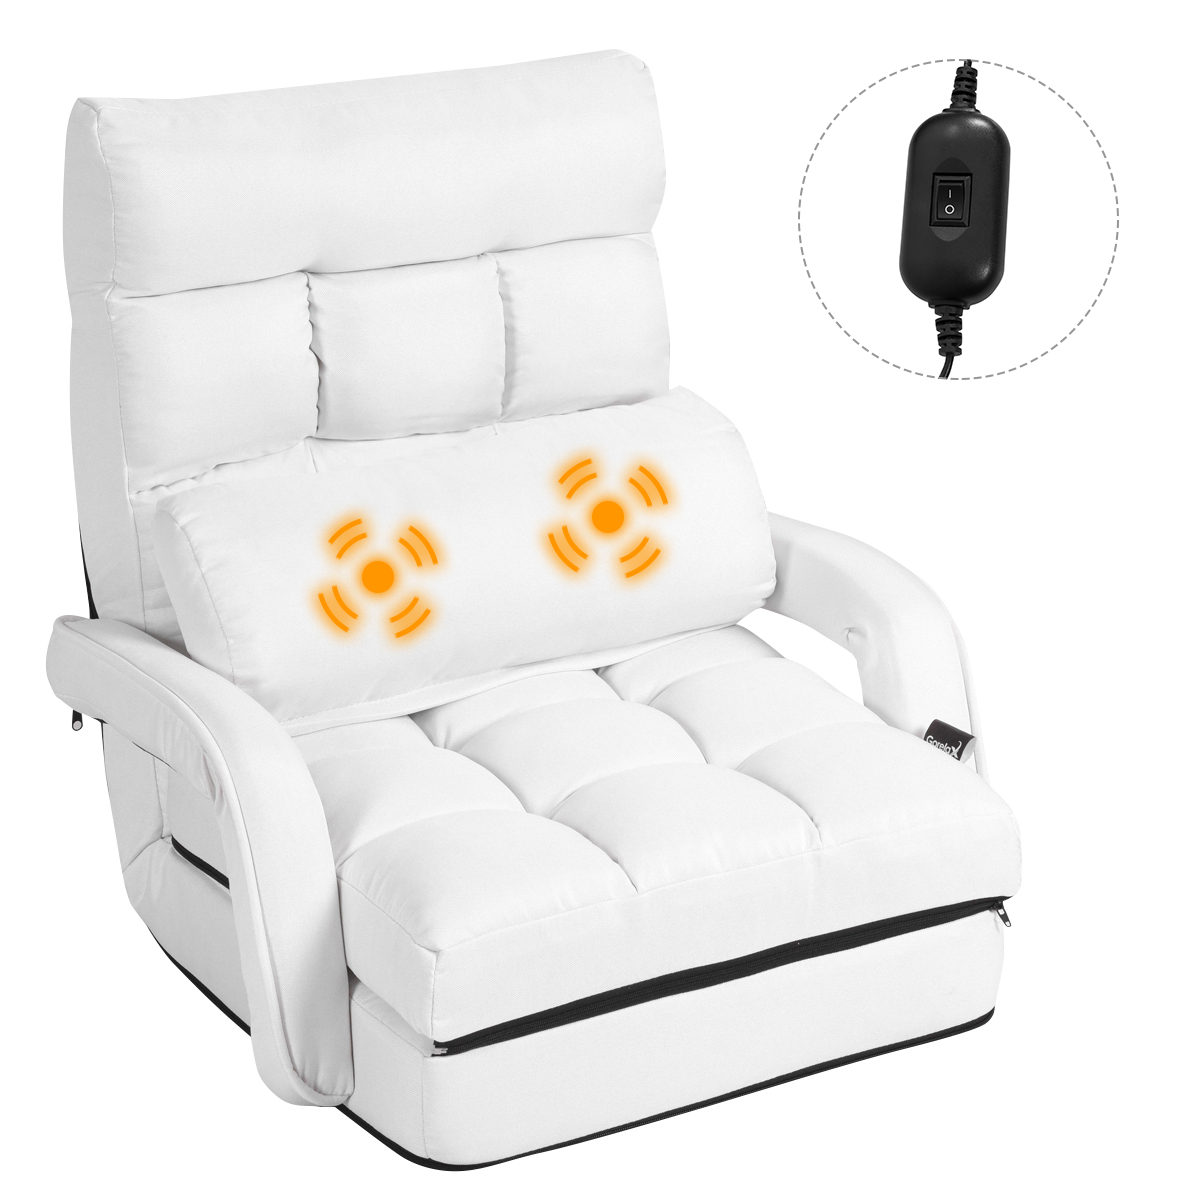 Costway Folding Floor Single Sofa Massage Recliner Chair W/ a Pillow 5 Adjustable Backrest Position Leisure Lounge Couch White - image 1 of 10